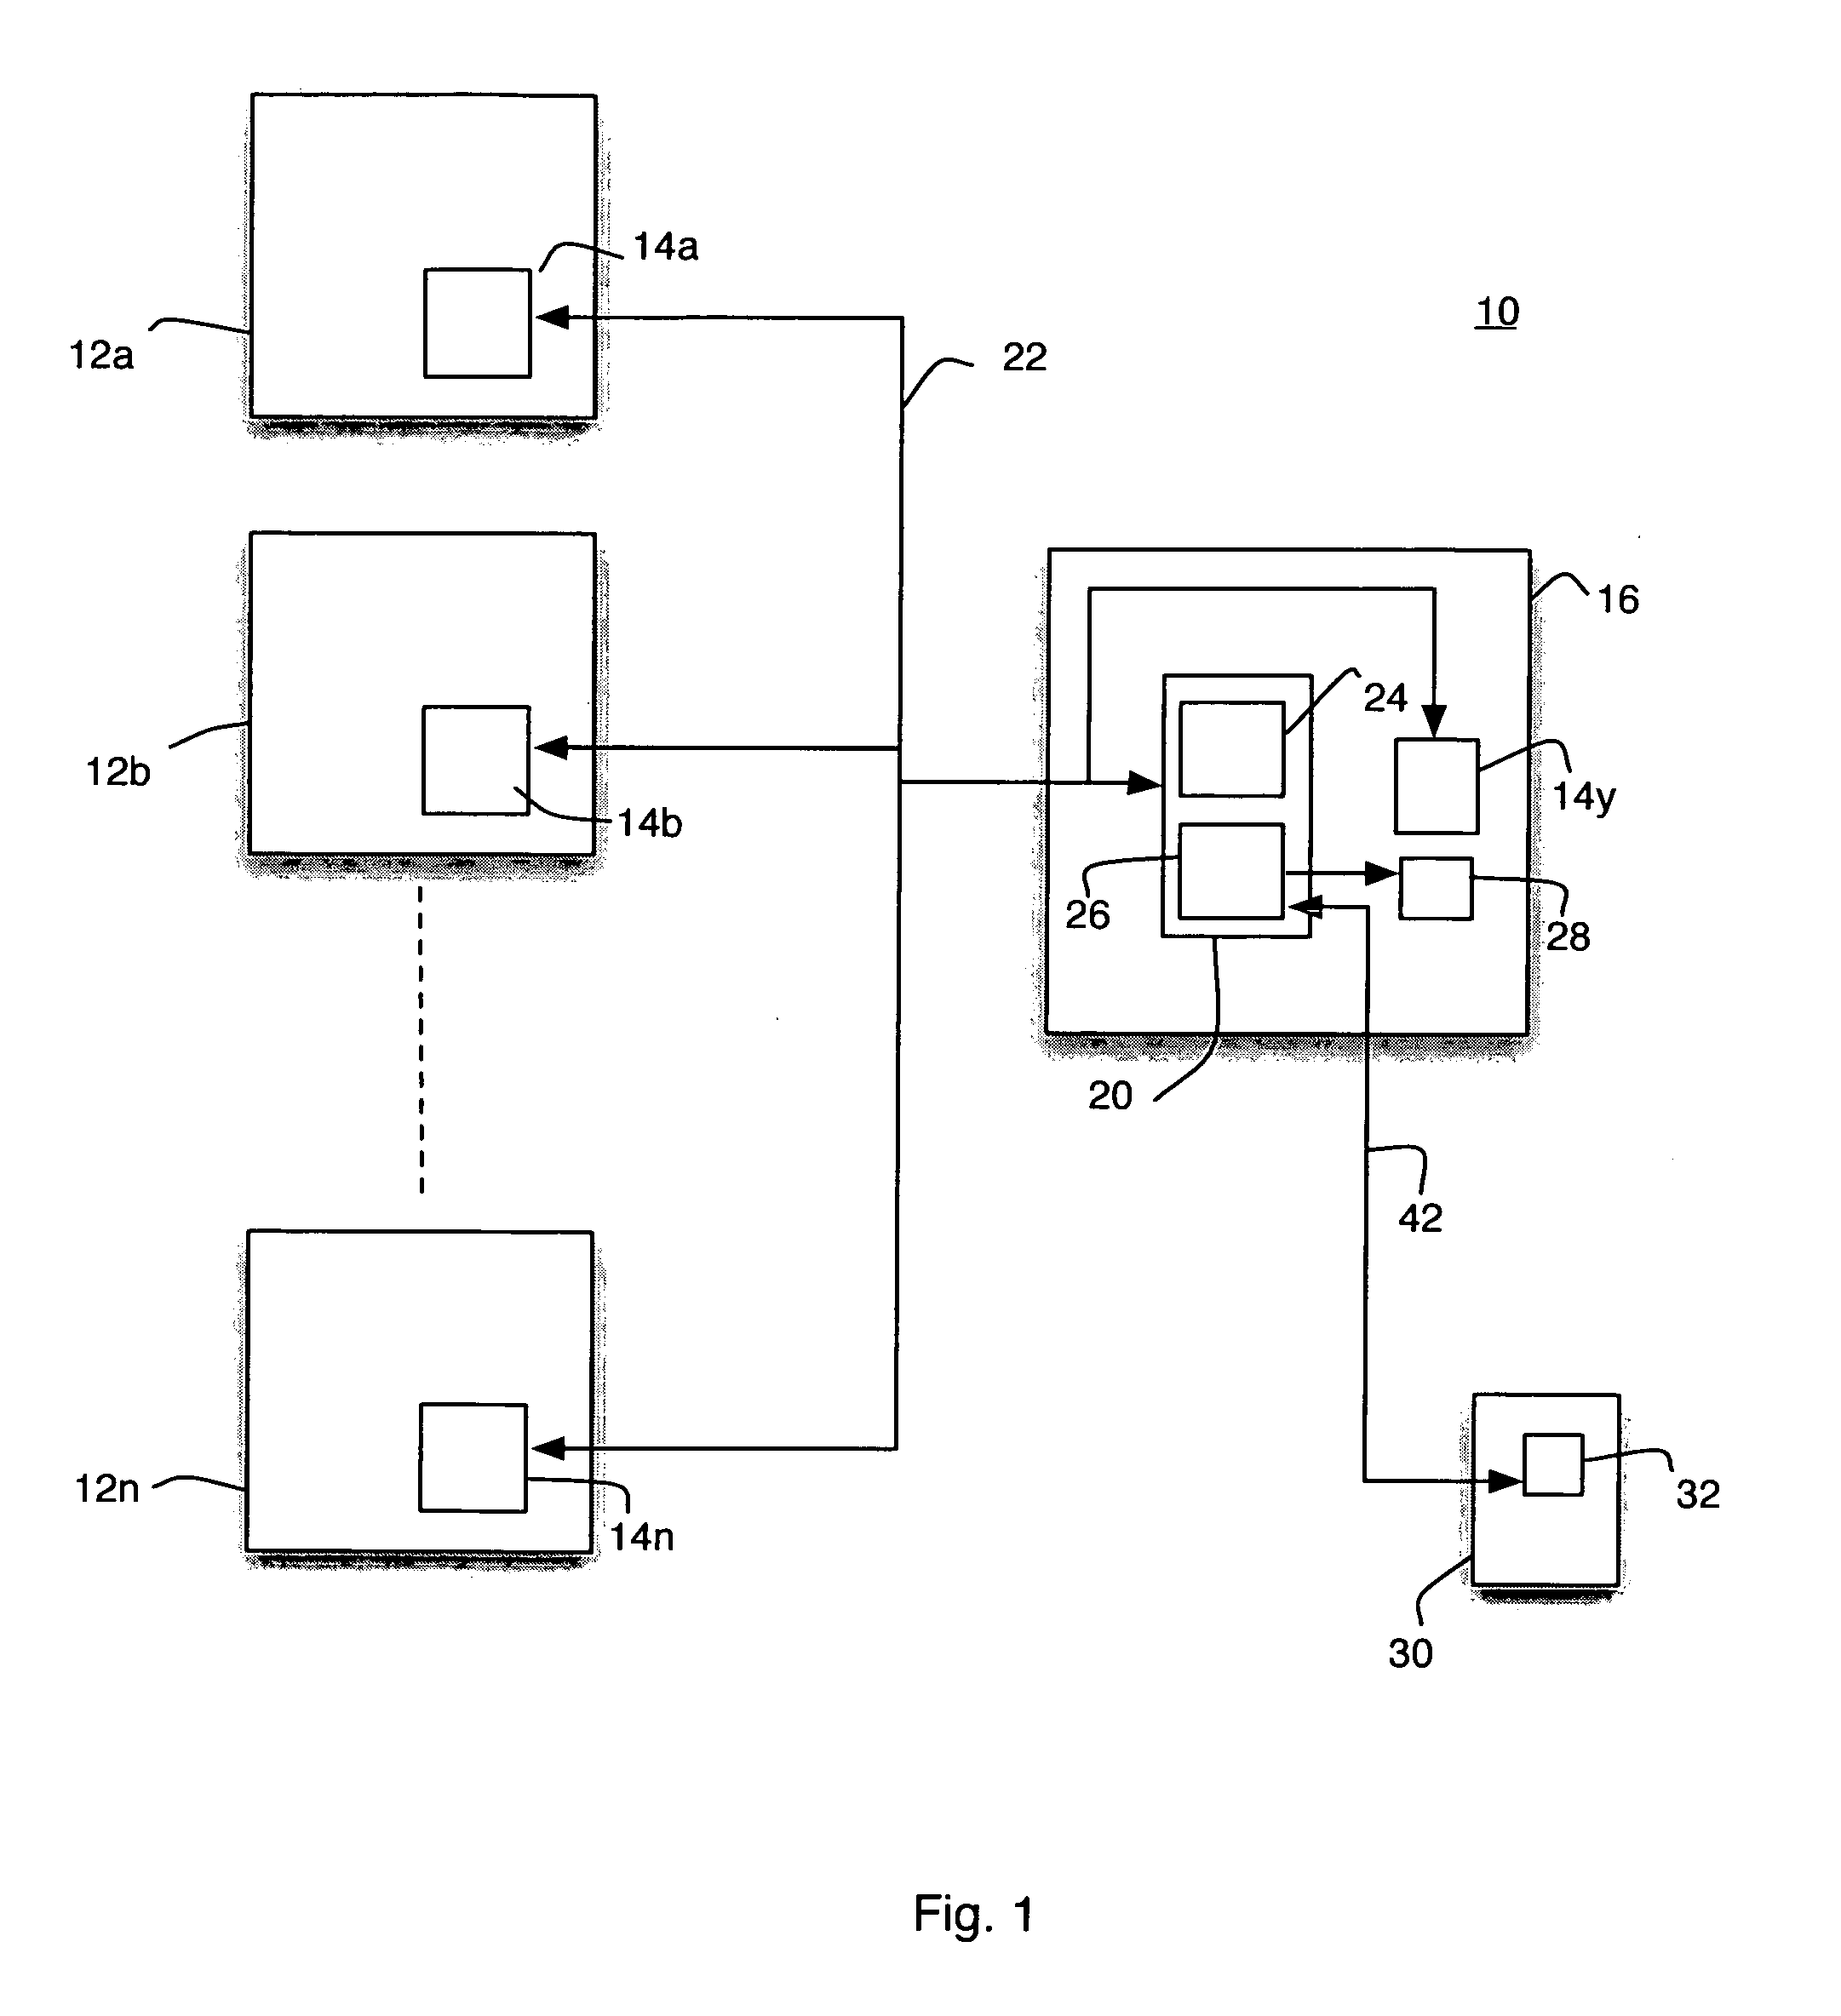 Distribution of system status information using a web feed